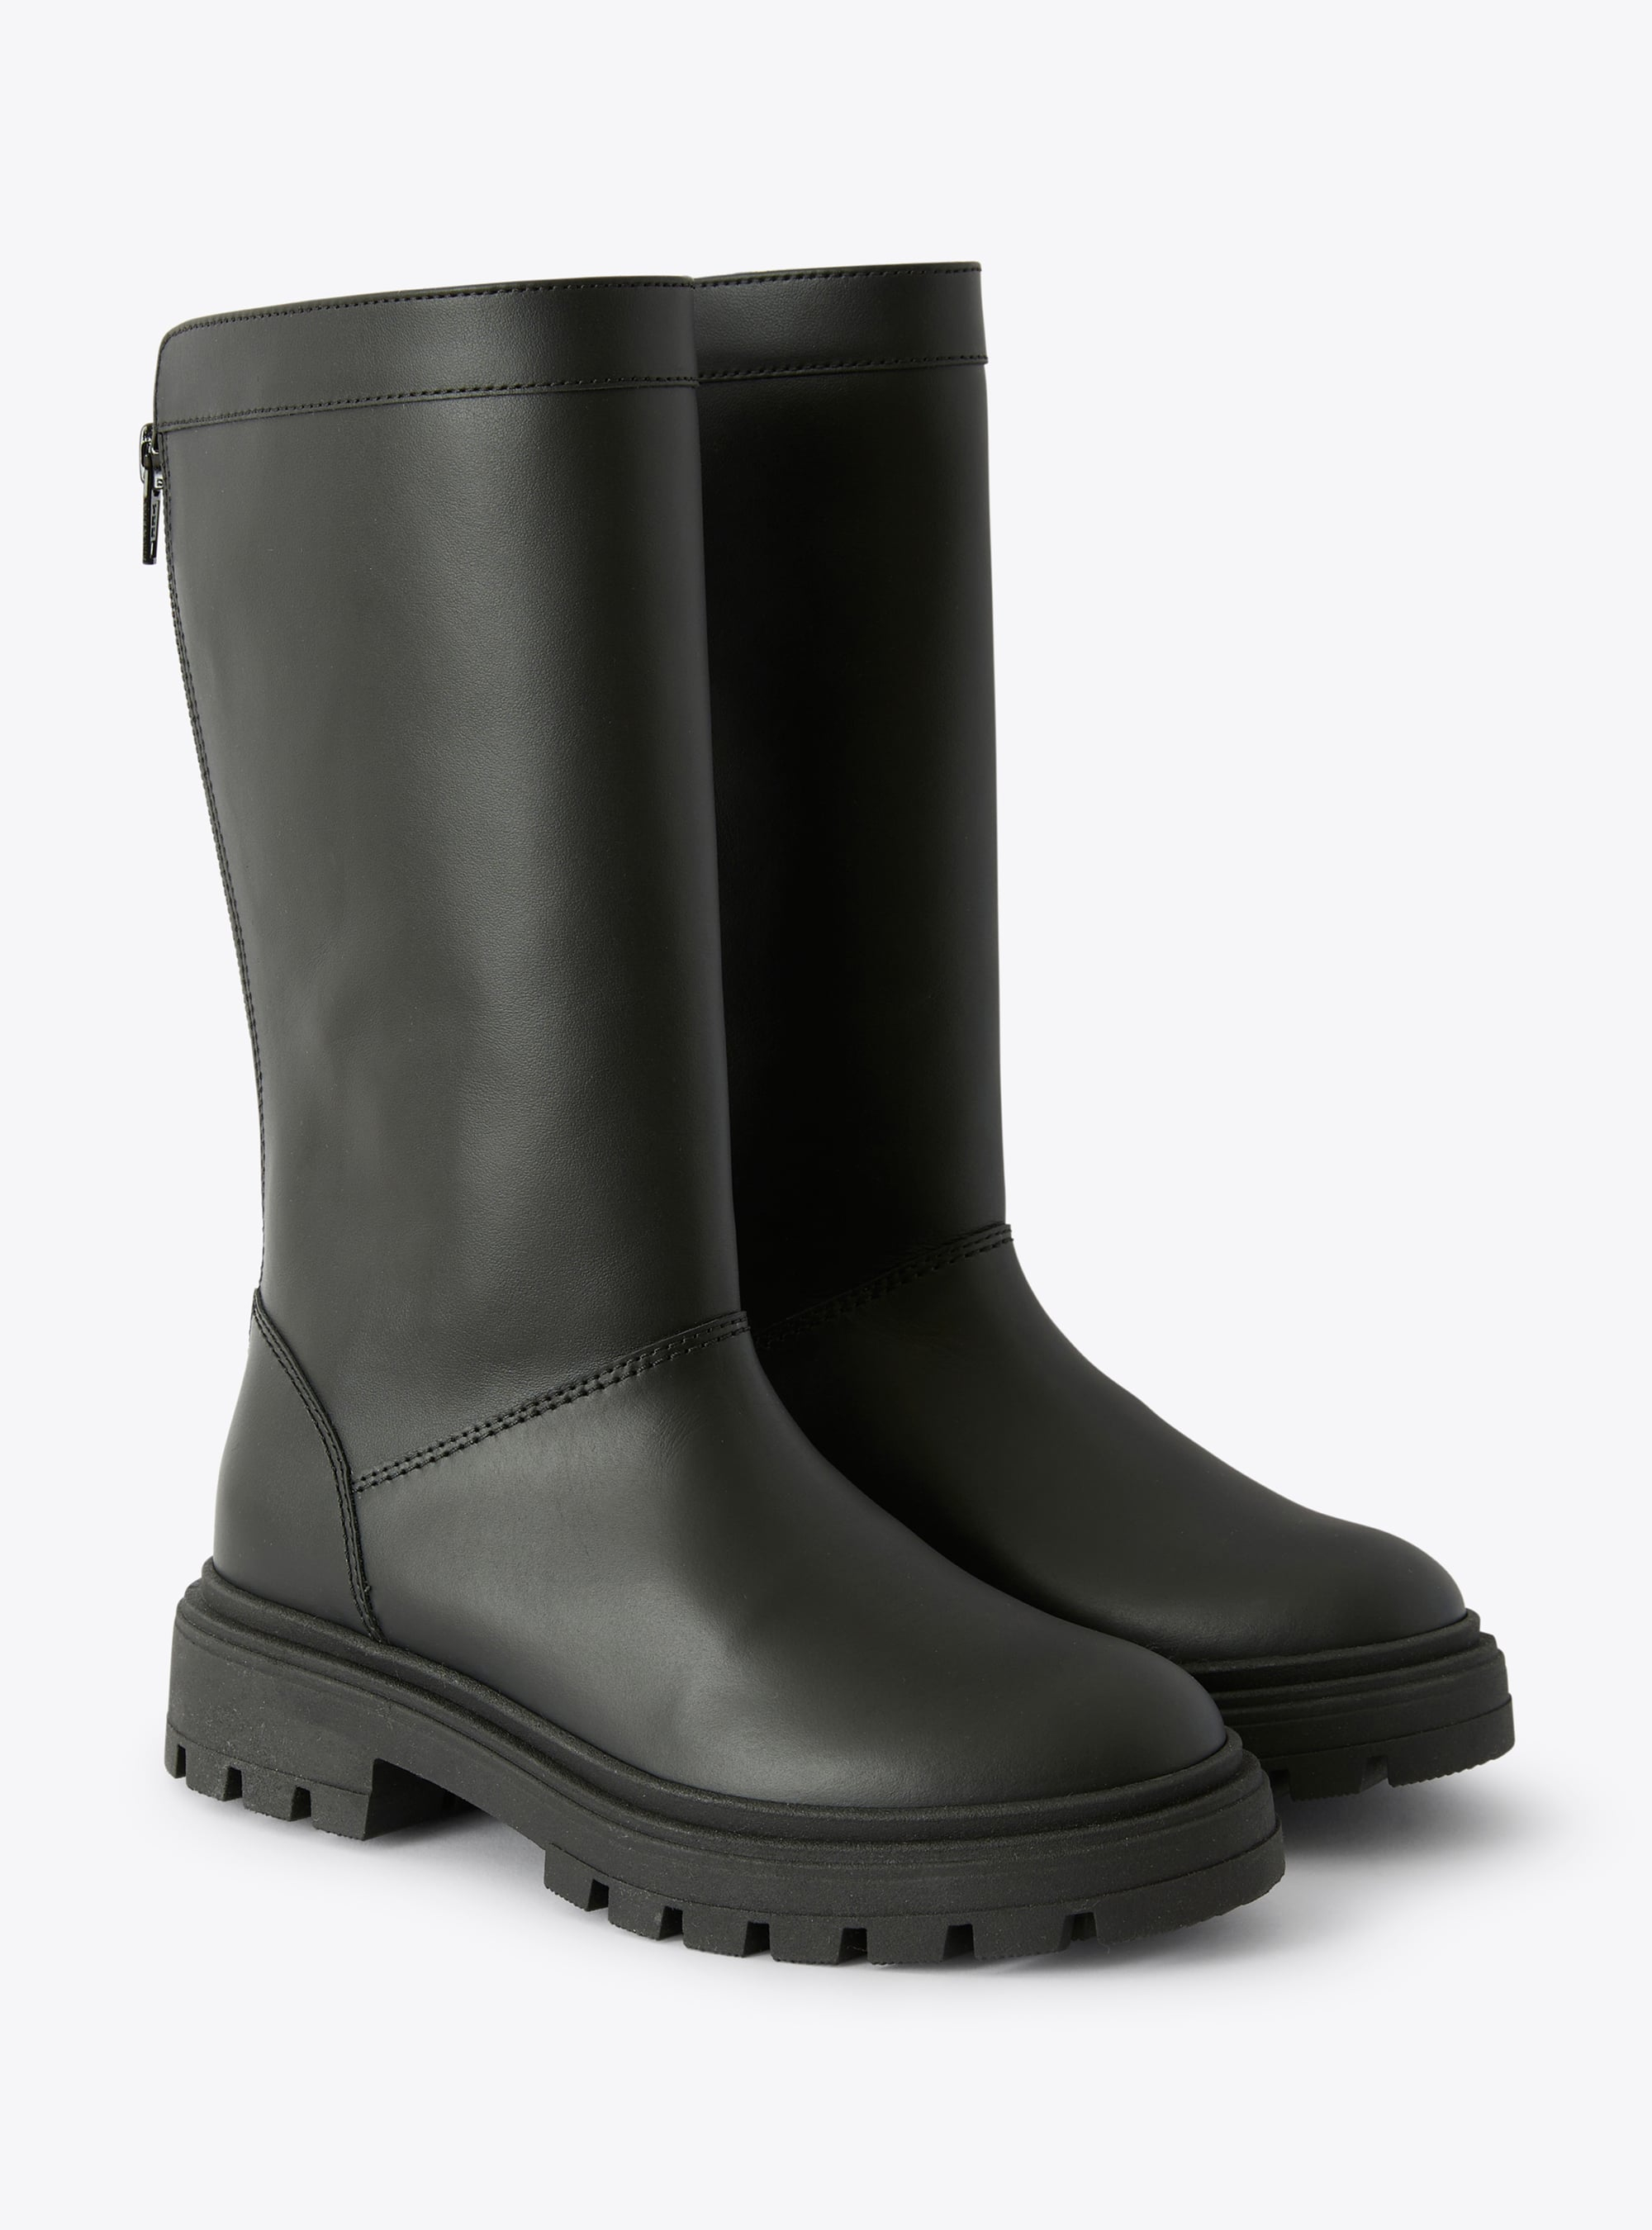 Black leather mid-calf boots - Shoes - Il Gufo